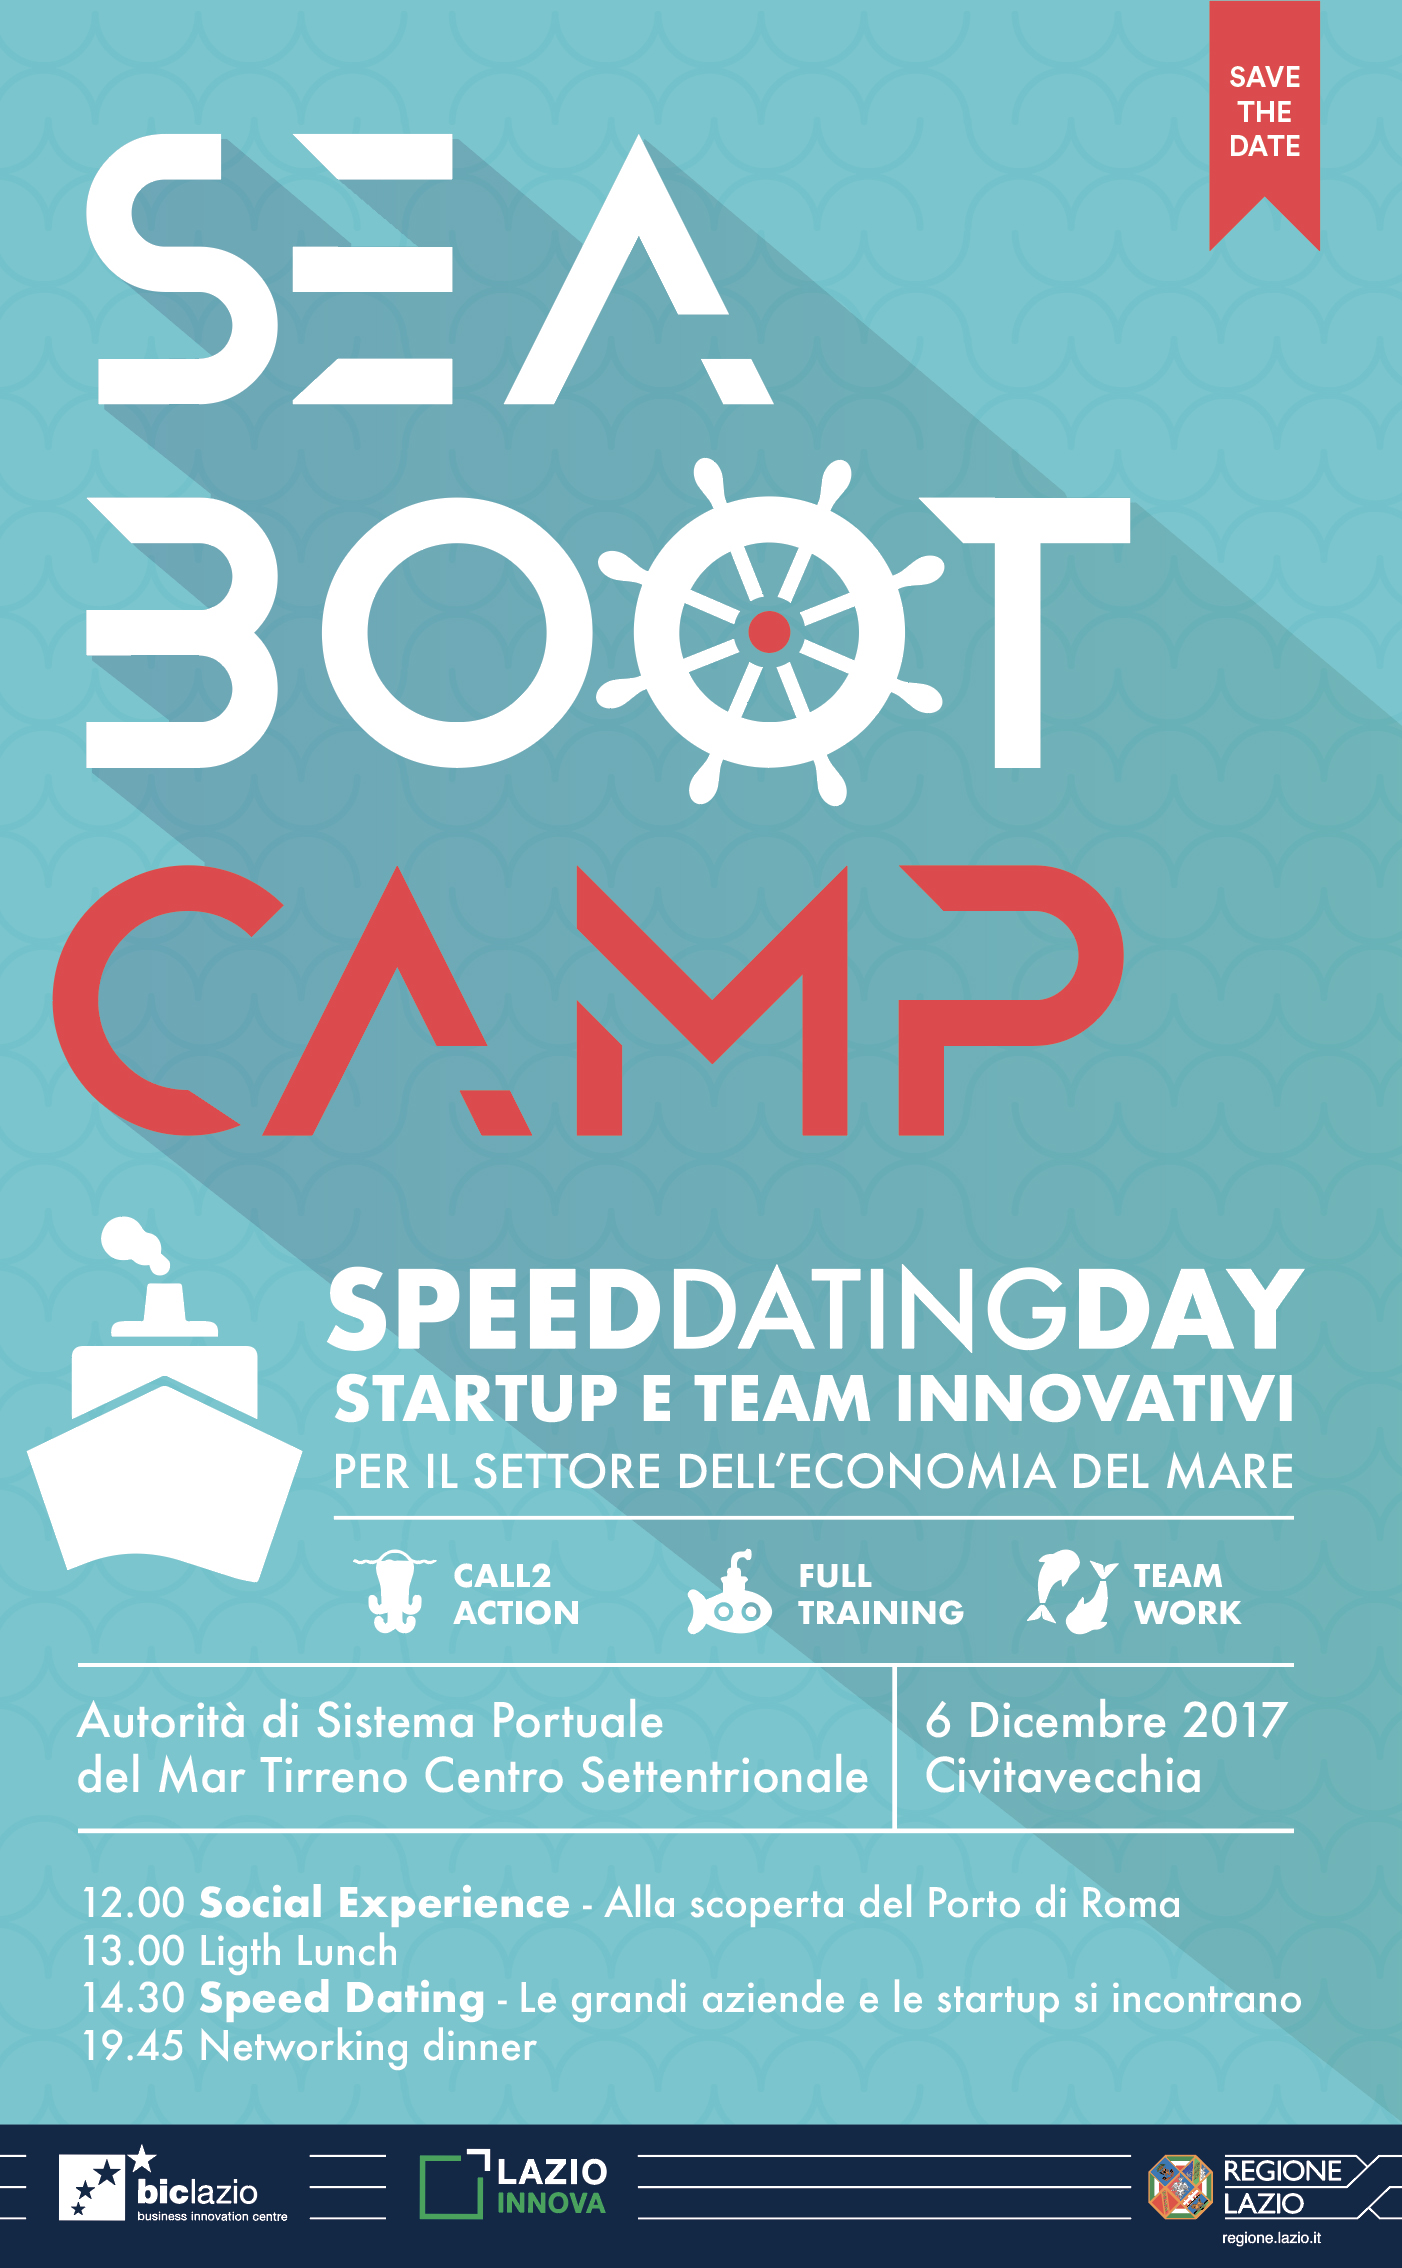 Programme of the final stage of the Sea Boot Camp 2017 that will be held on December 6th 2017 at the Port of Civitavecchia